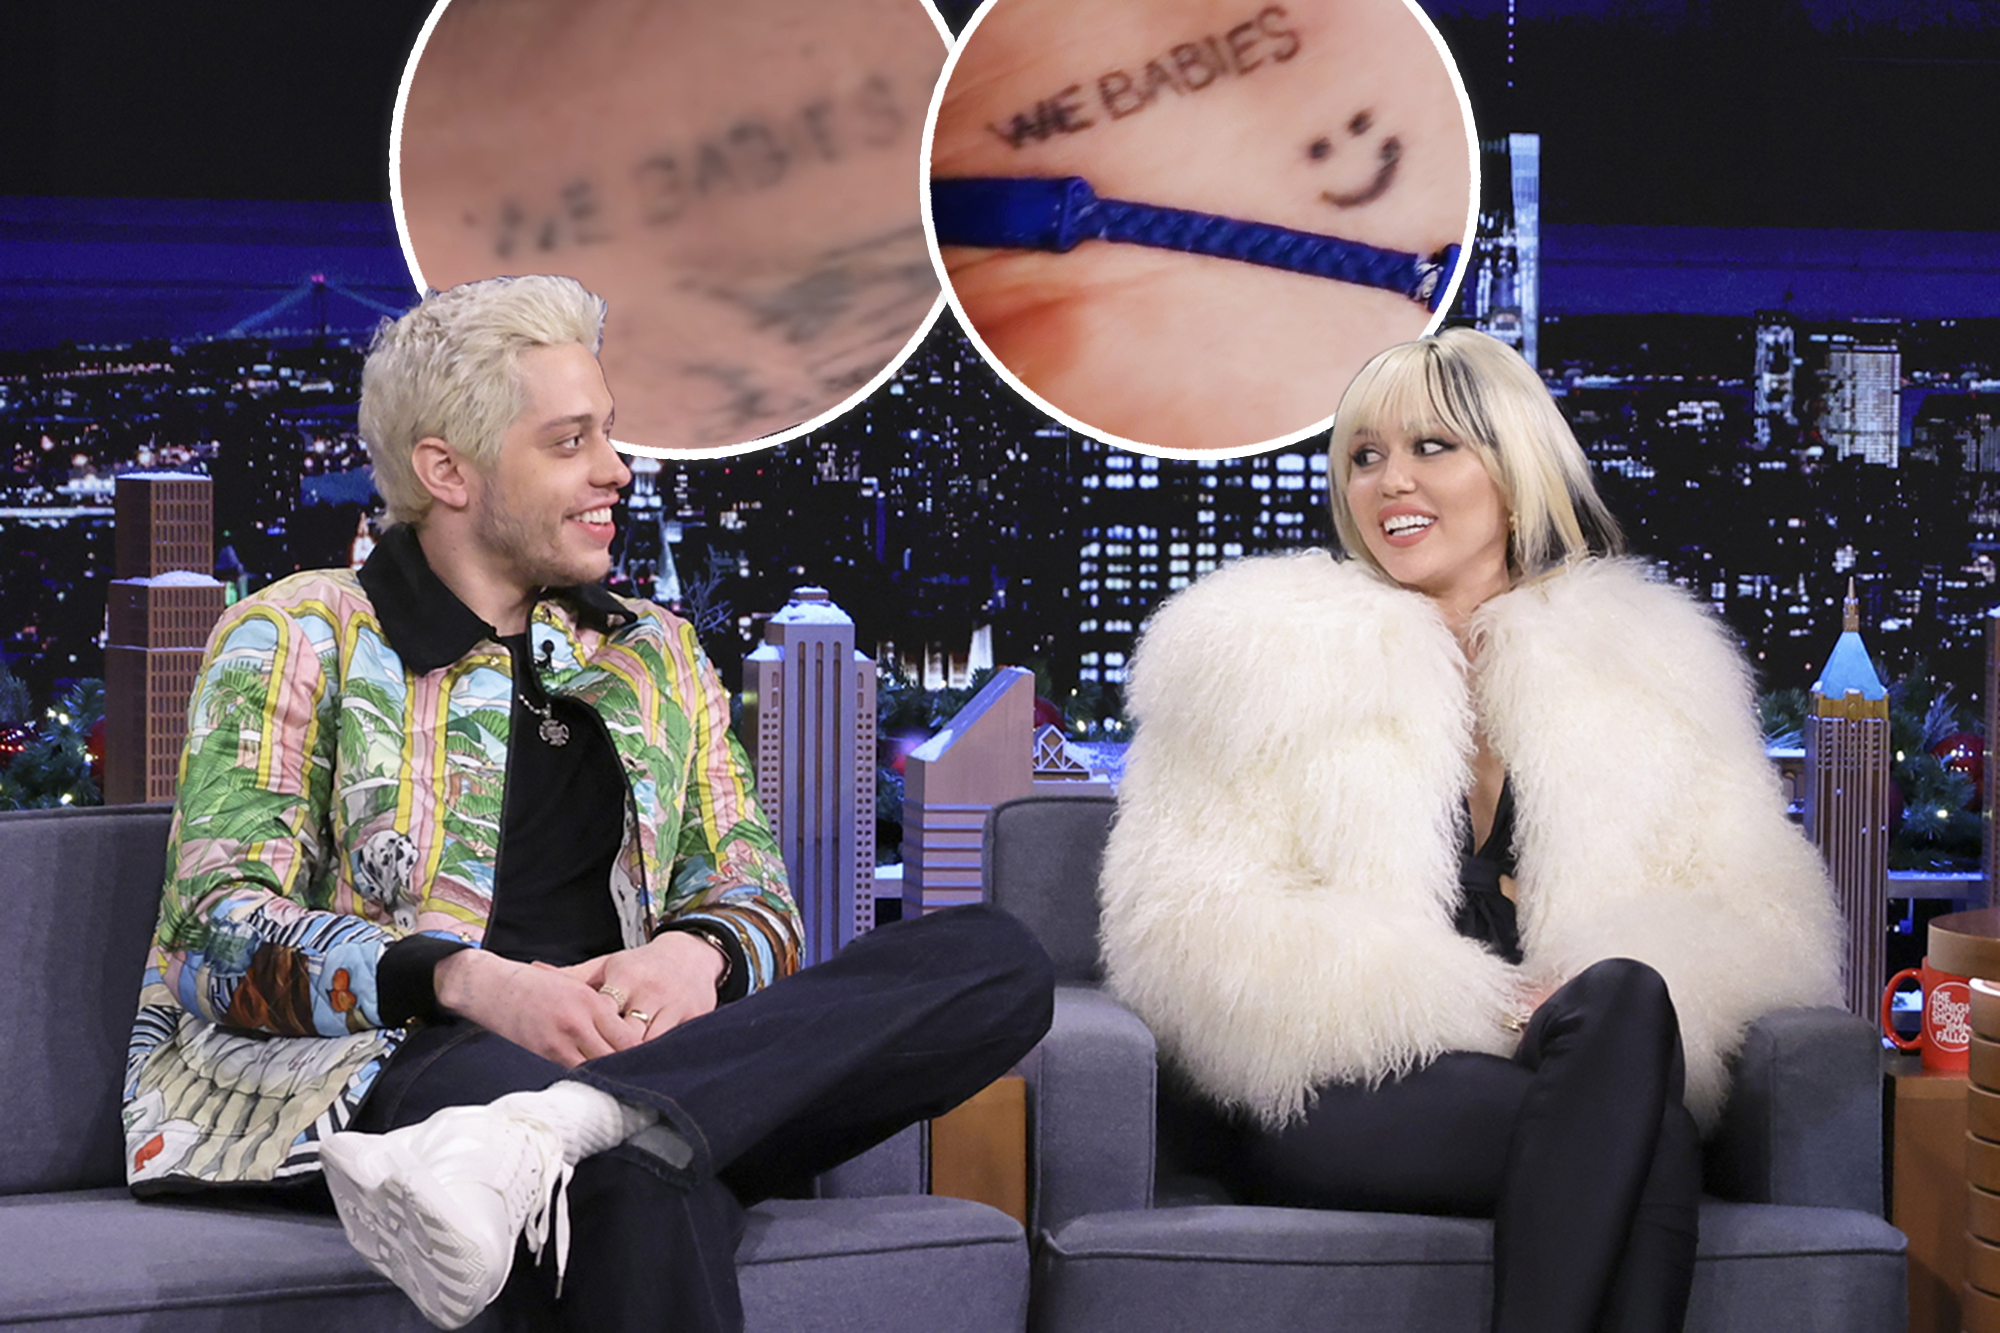 Miley Cyrus and Pete Davidson on the Tonight Show with insets of their 